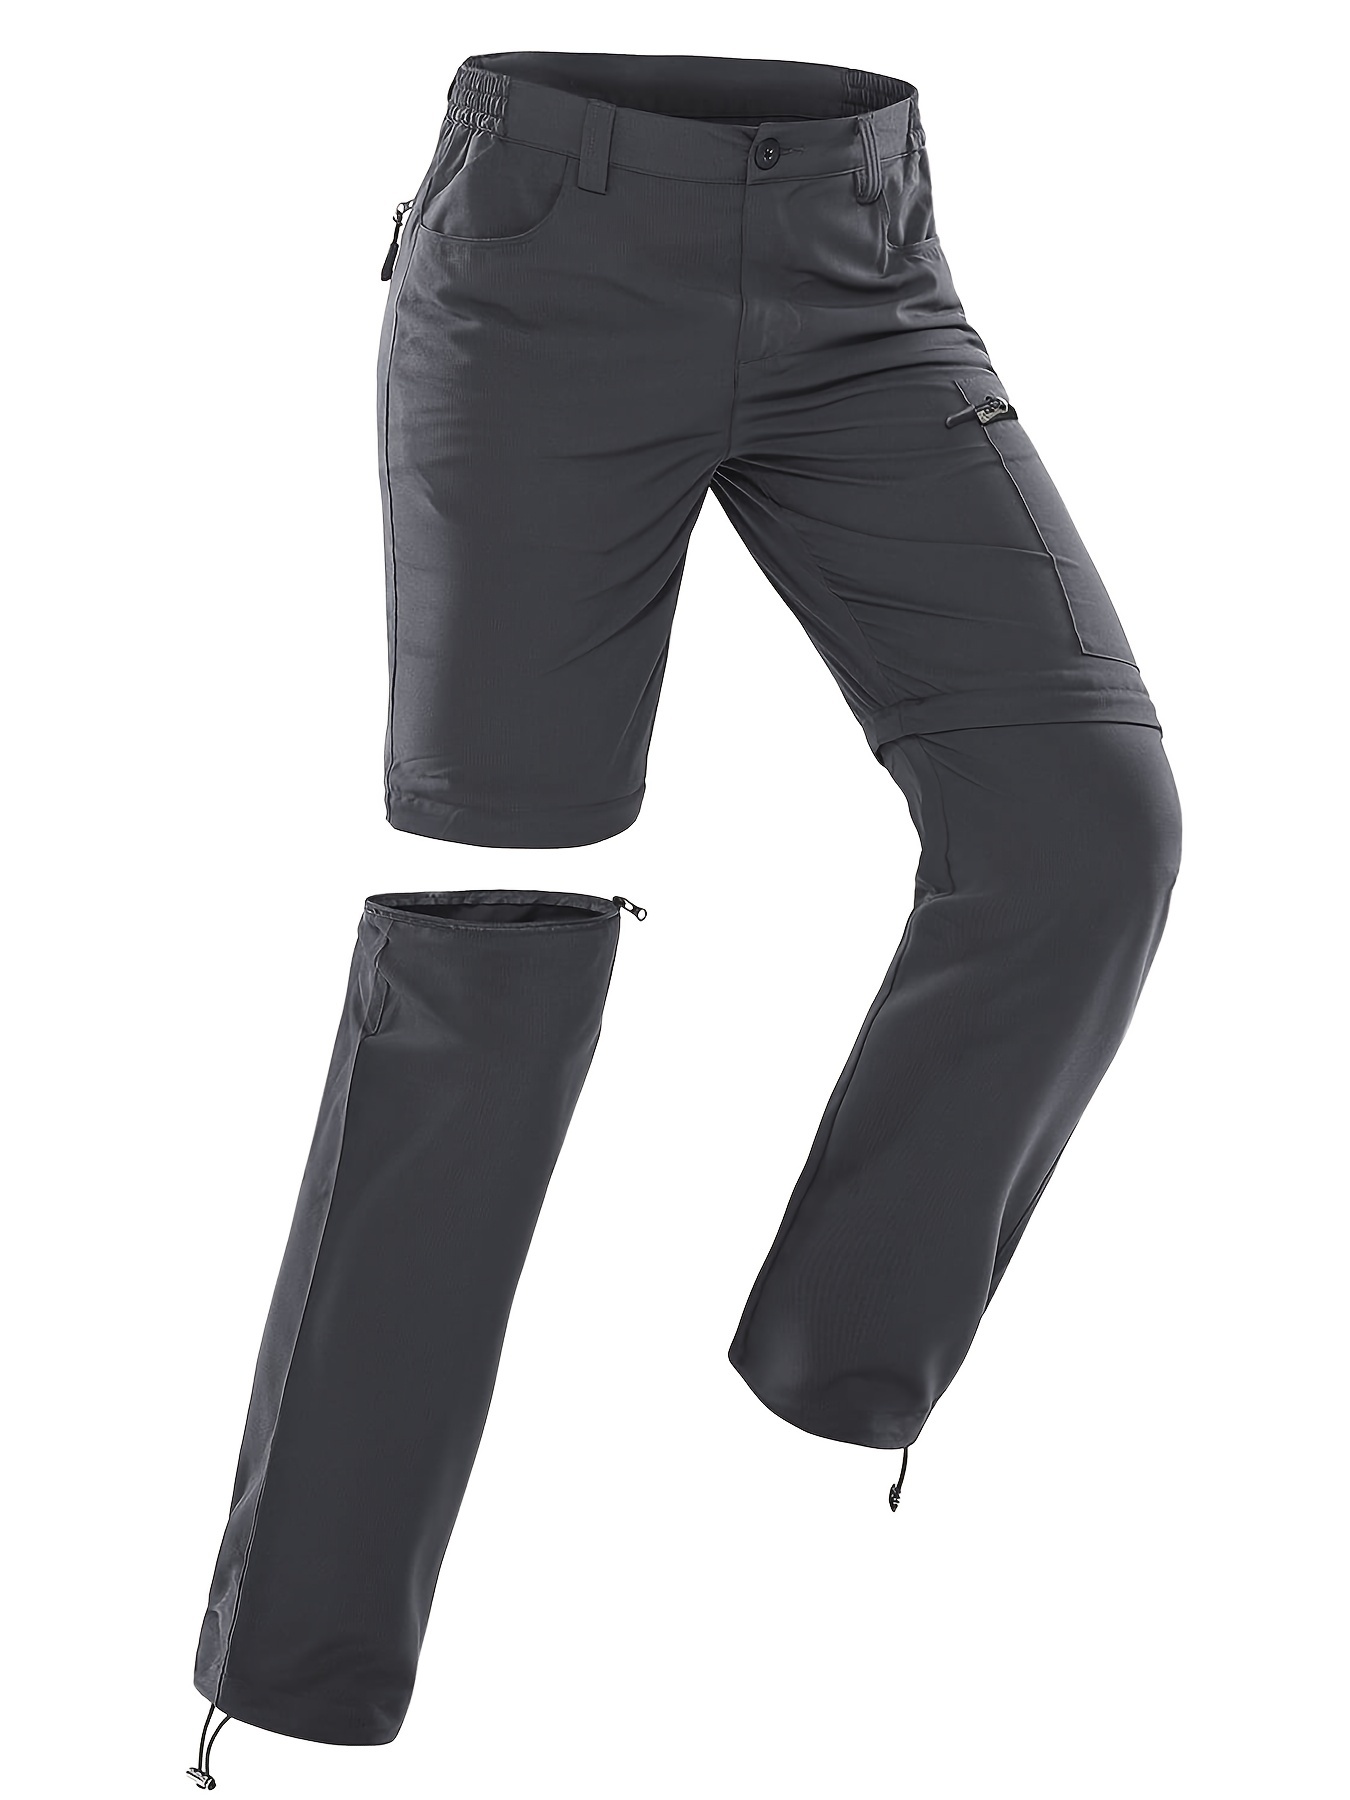 Women's Convertible Hiking Pants - Quick Dry Outdoor Pants with Pockets